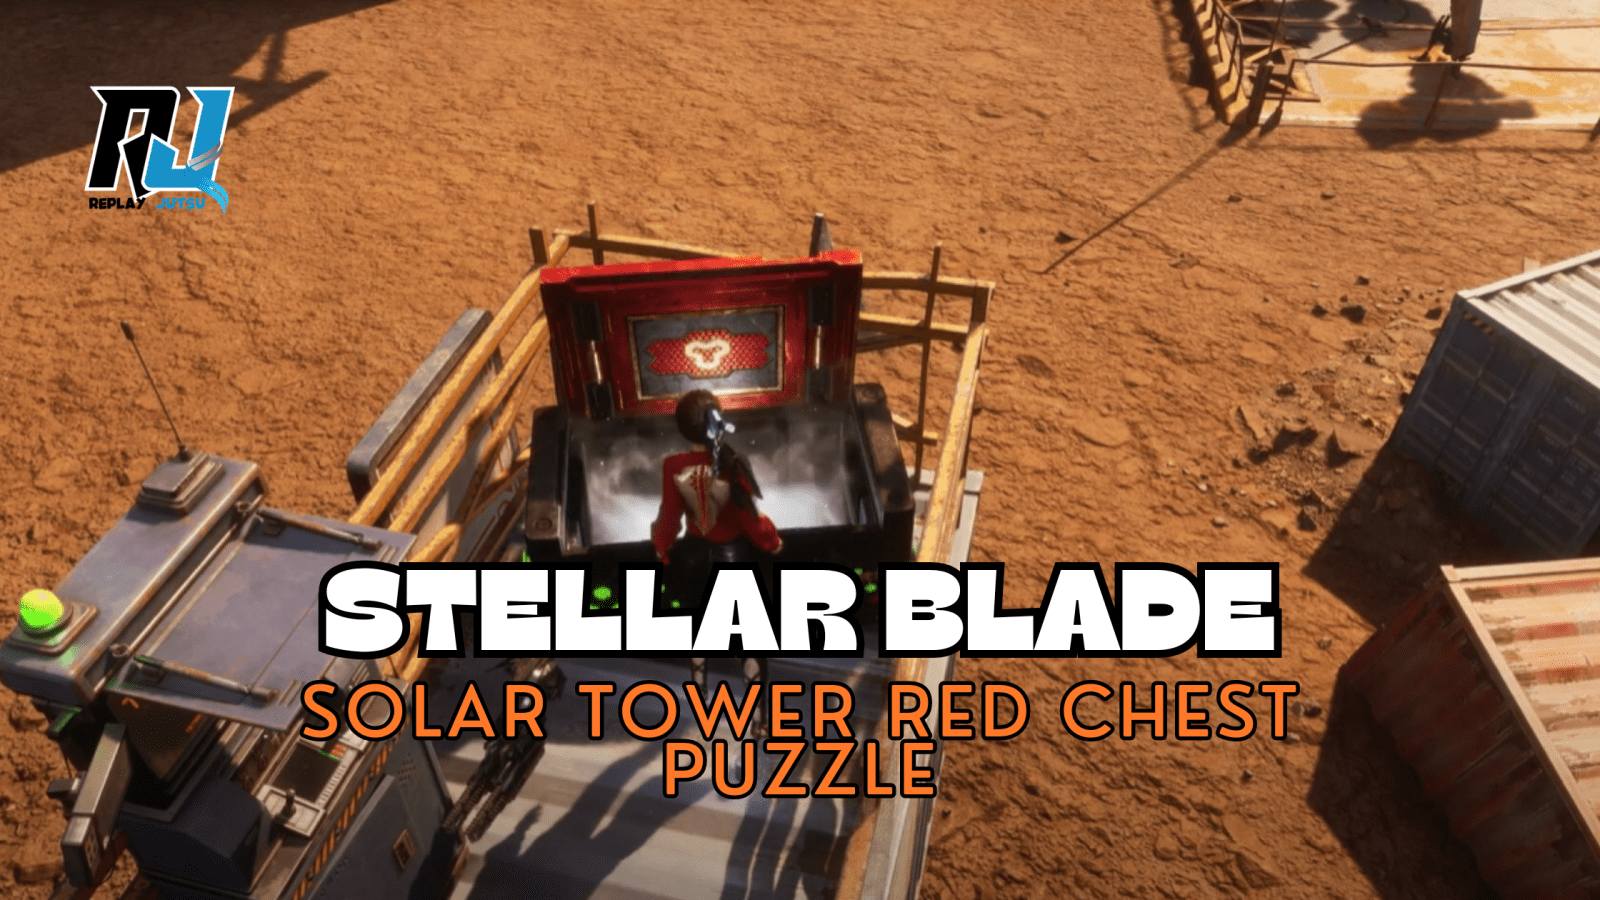 How To Solve Solar Tower Red Chest Puzzle in Stellar Blade - Activate Four Terminals